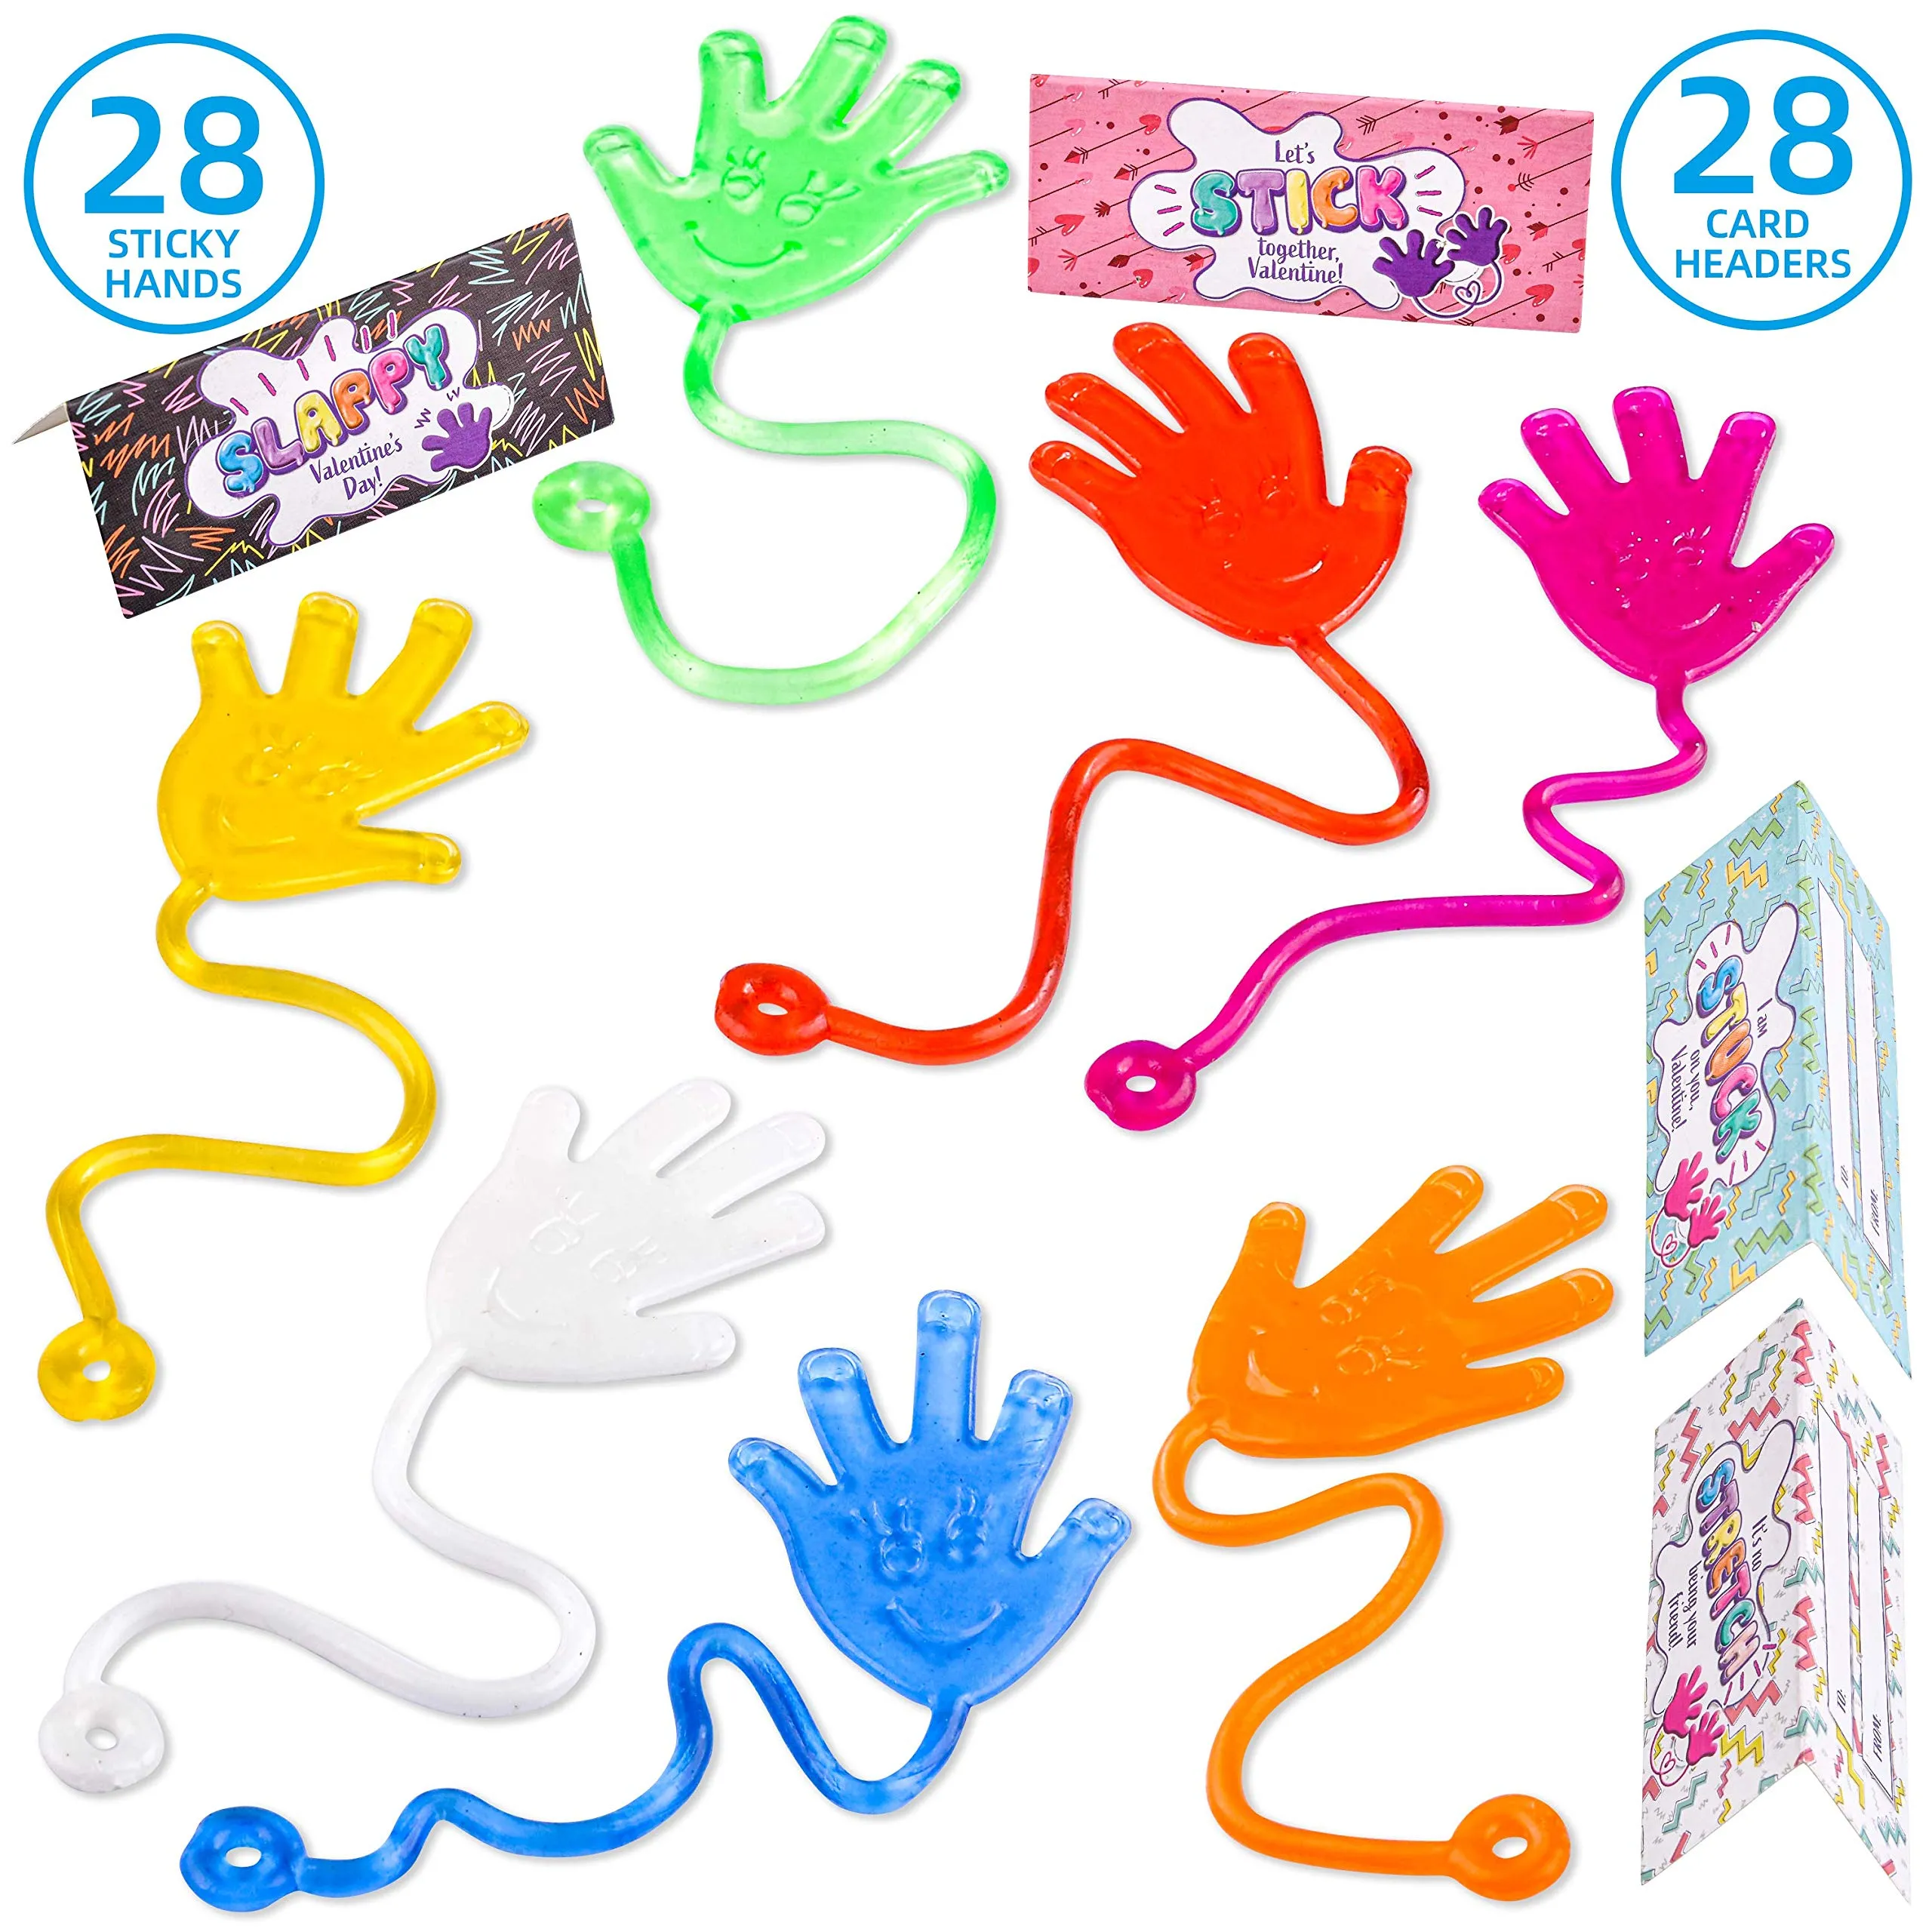 JOYIN 28 Packs Sticky Hands with Card Headers for Kids Party Favor, Classroom Exchange Prizes, Valentines Greeting Cards, Valentine Party Favors